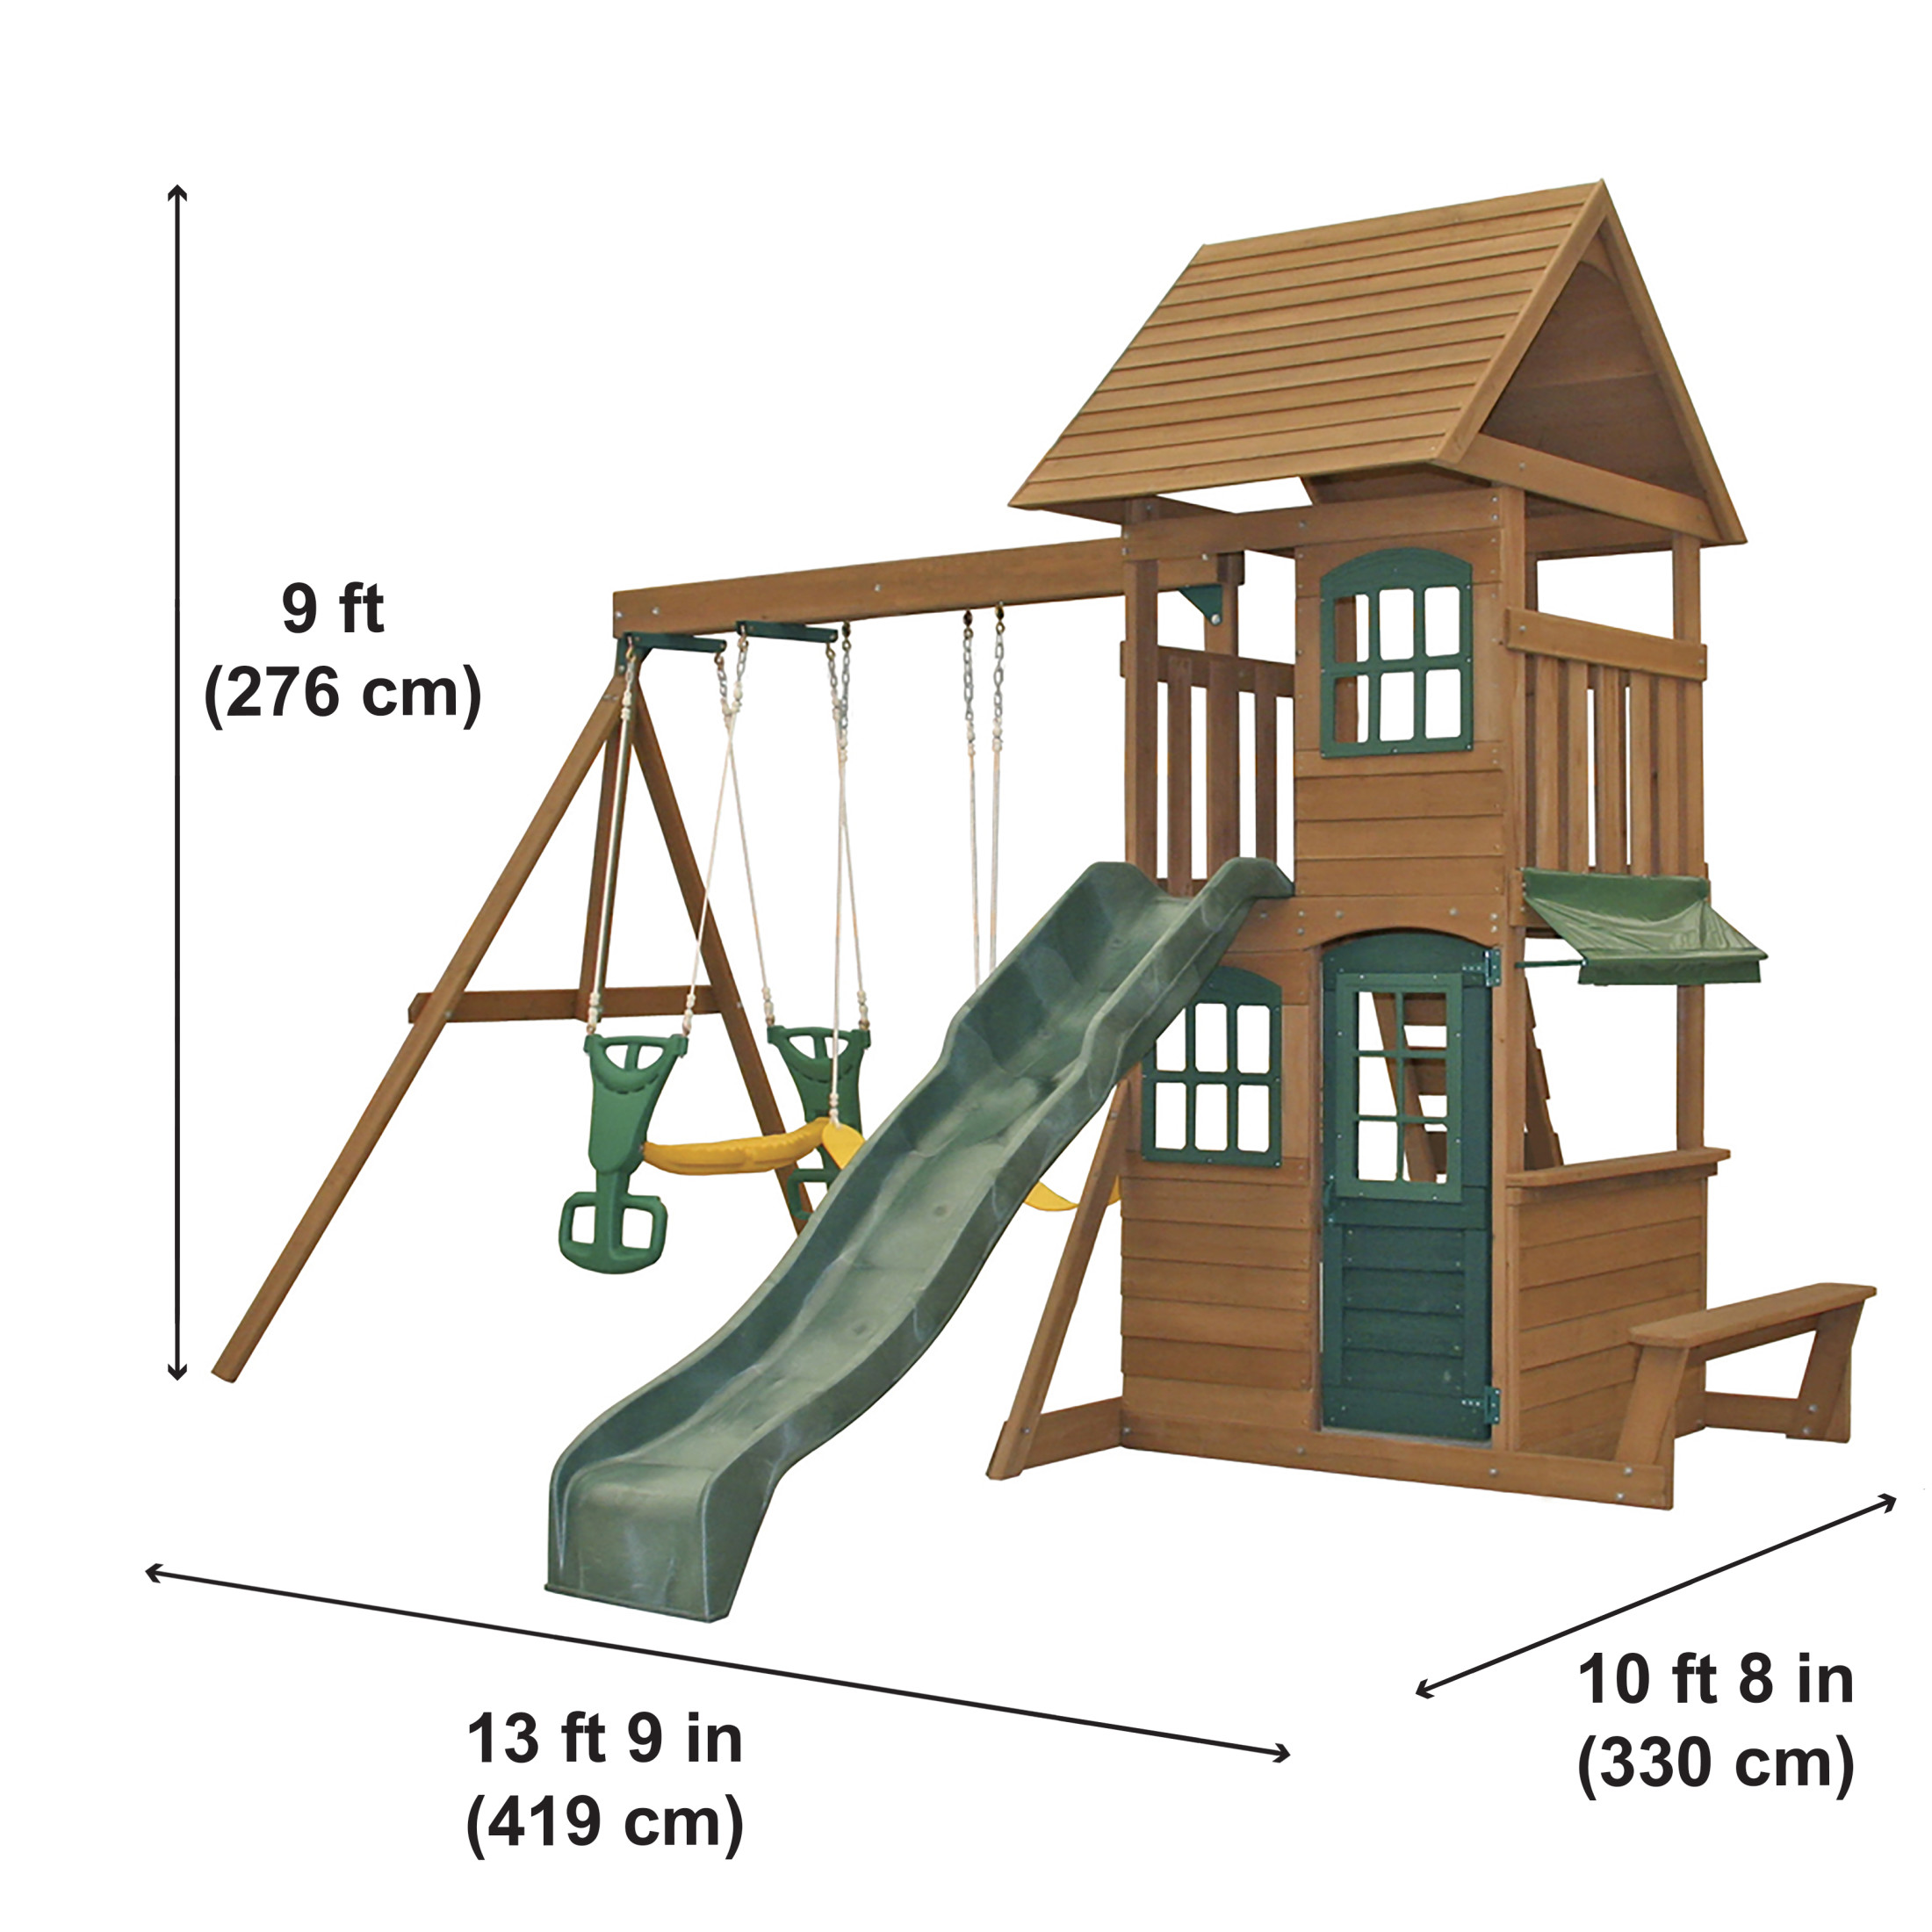 KidKraft Windale Wooden Swing Set / Playset with Clubhouse, Swings, Slide, Shaded Table and Bench - image 11 of 12